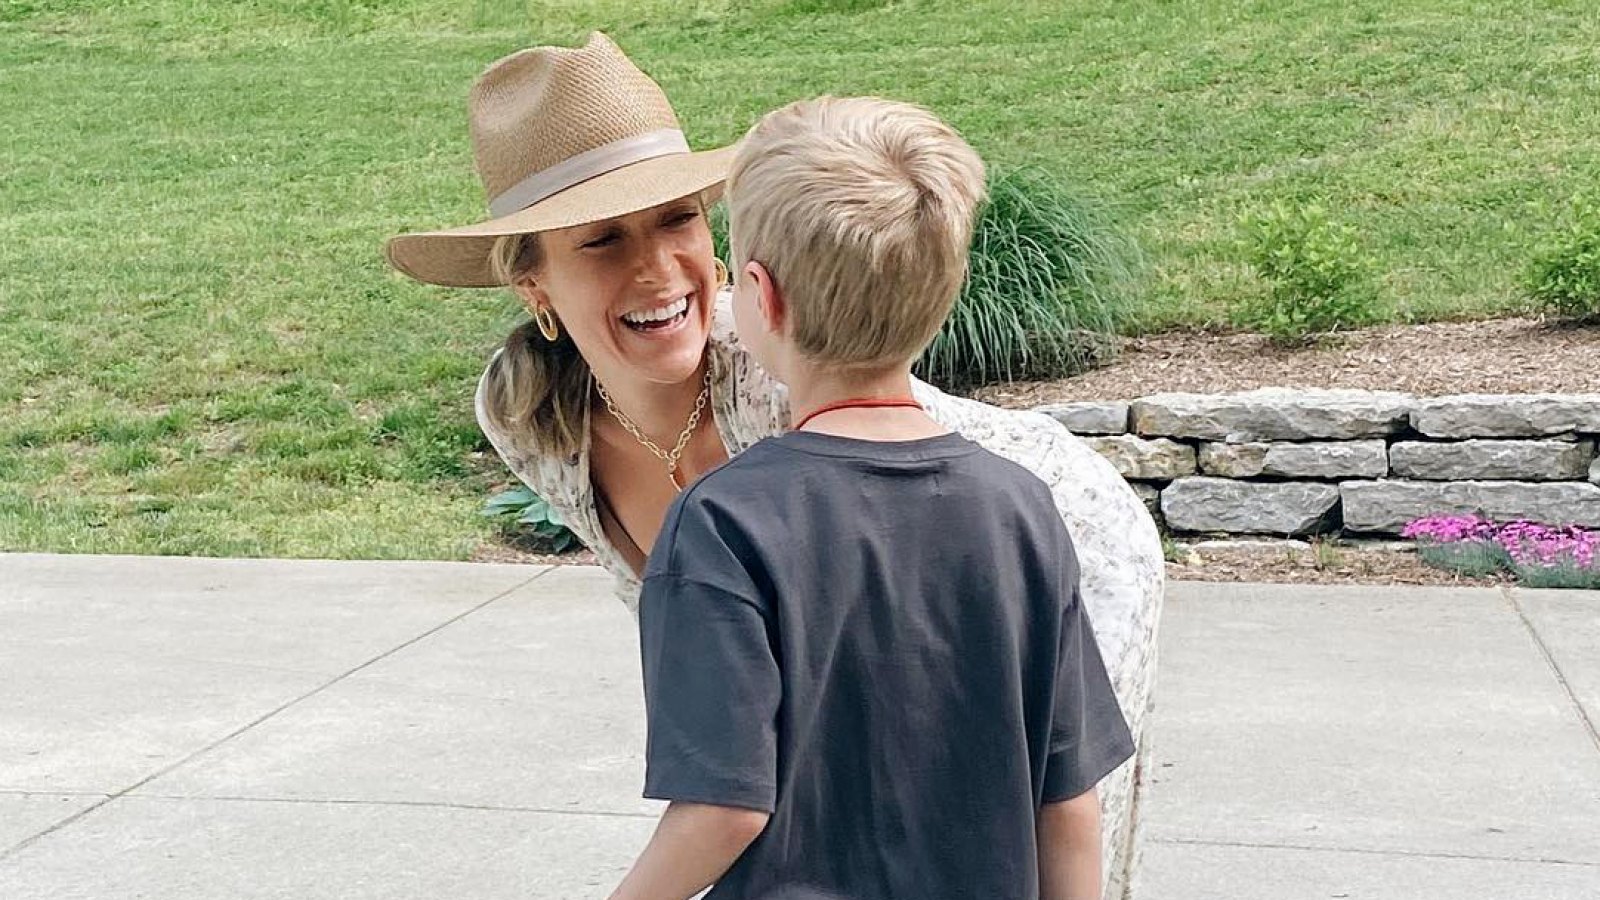 Kristin Cavallari and Son Jaxon Wear Matching Outfits at His Request: 'My Heart Exploded'